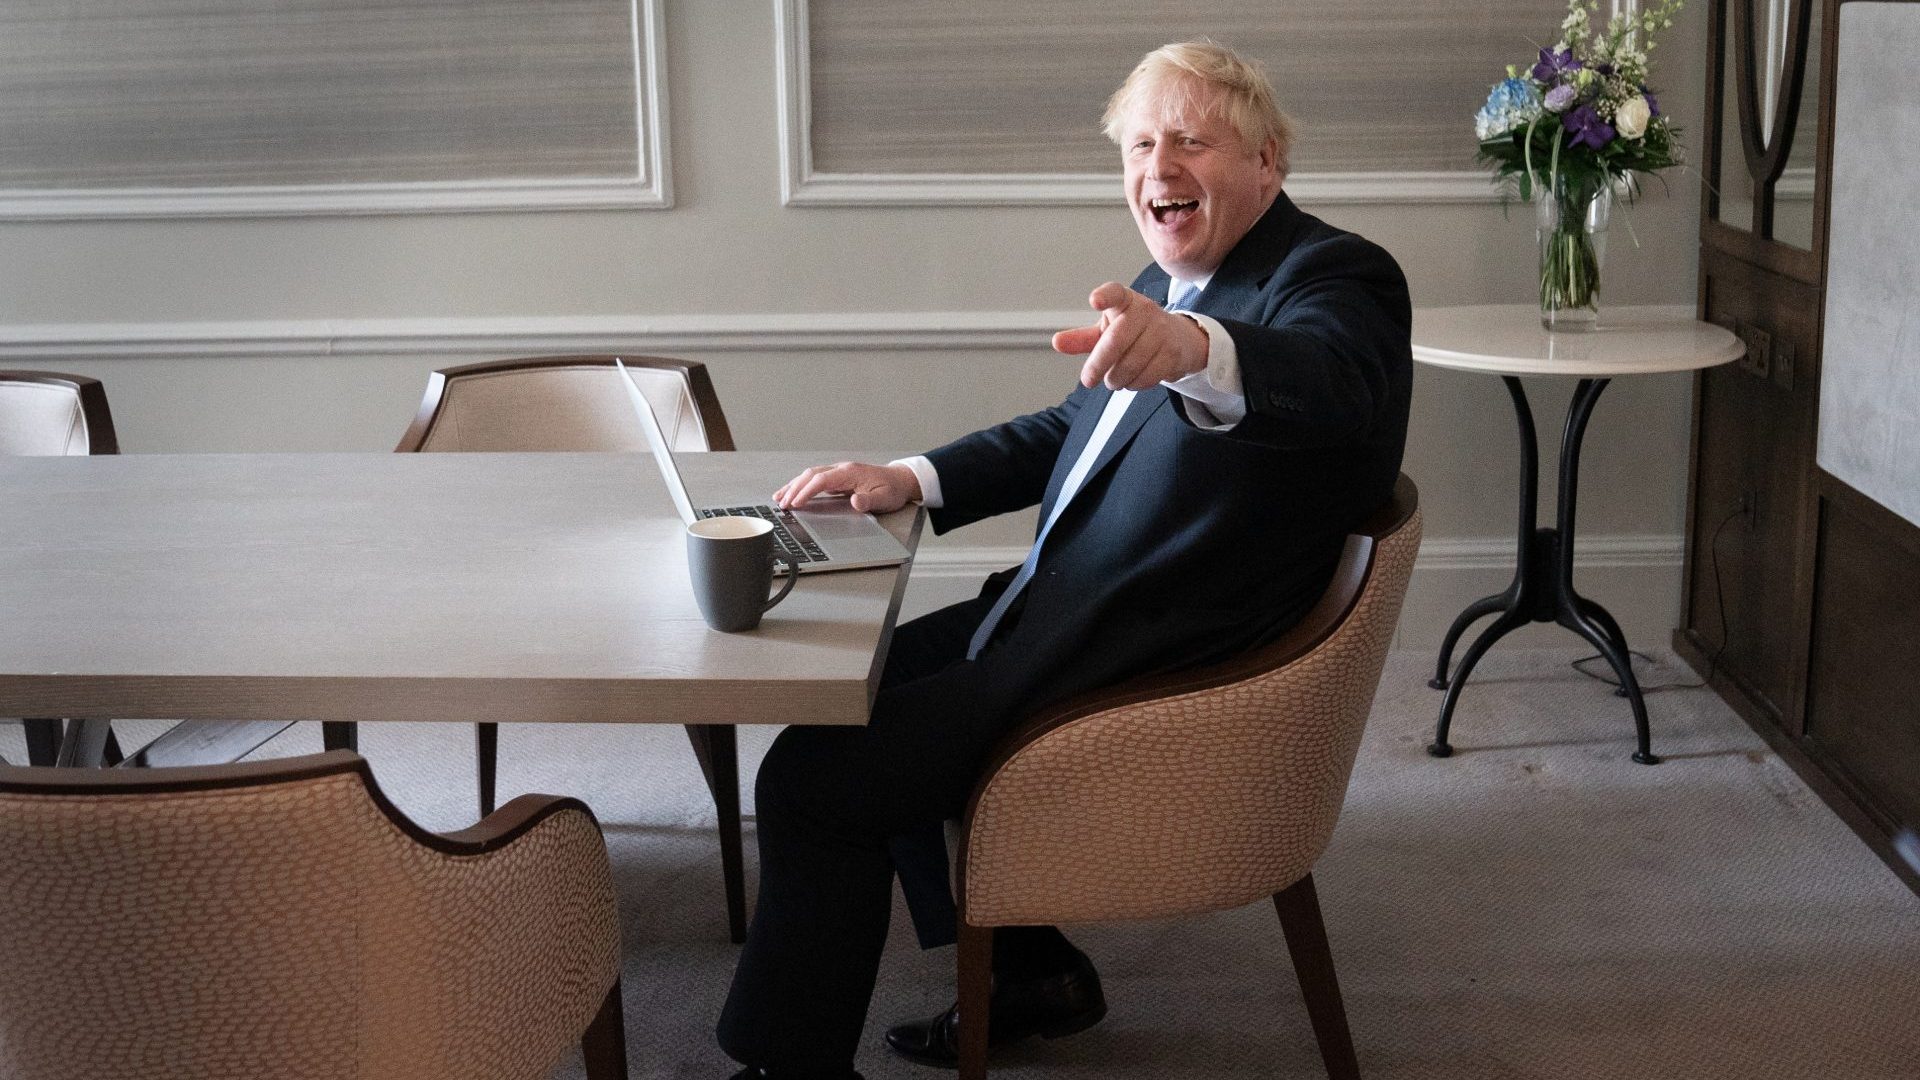 All spin, no strategy. Boris Johnson preparing his Tory conference speech. Photo: Stefan Rousseau/ Pool/Getty Images Images